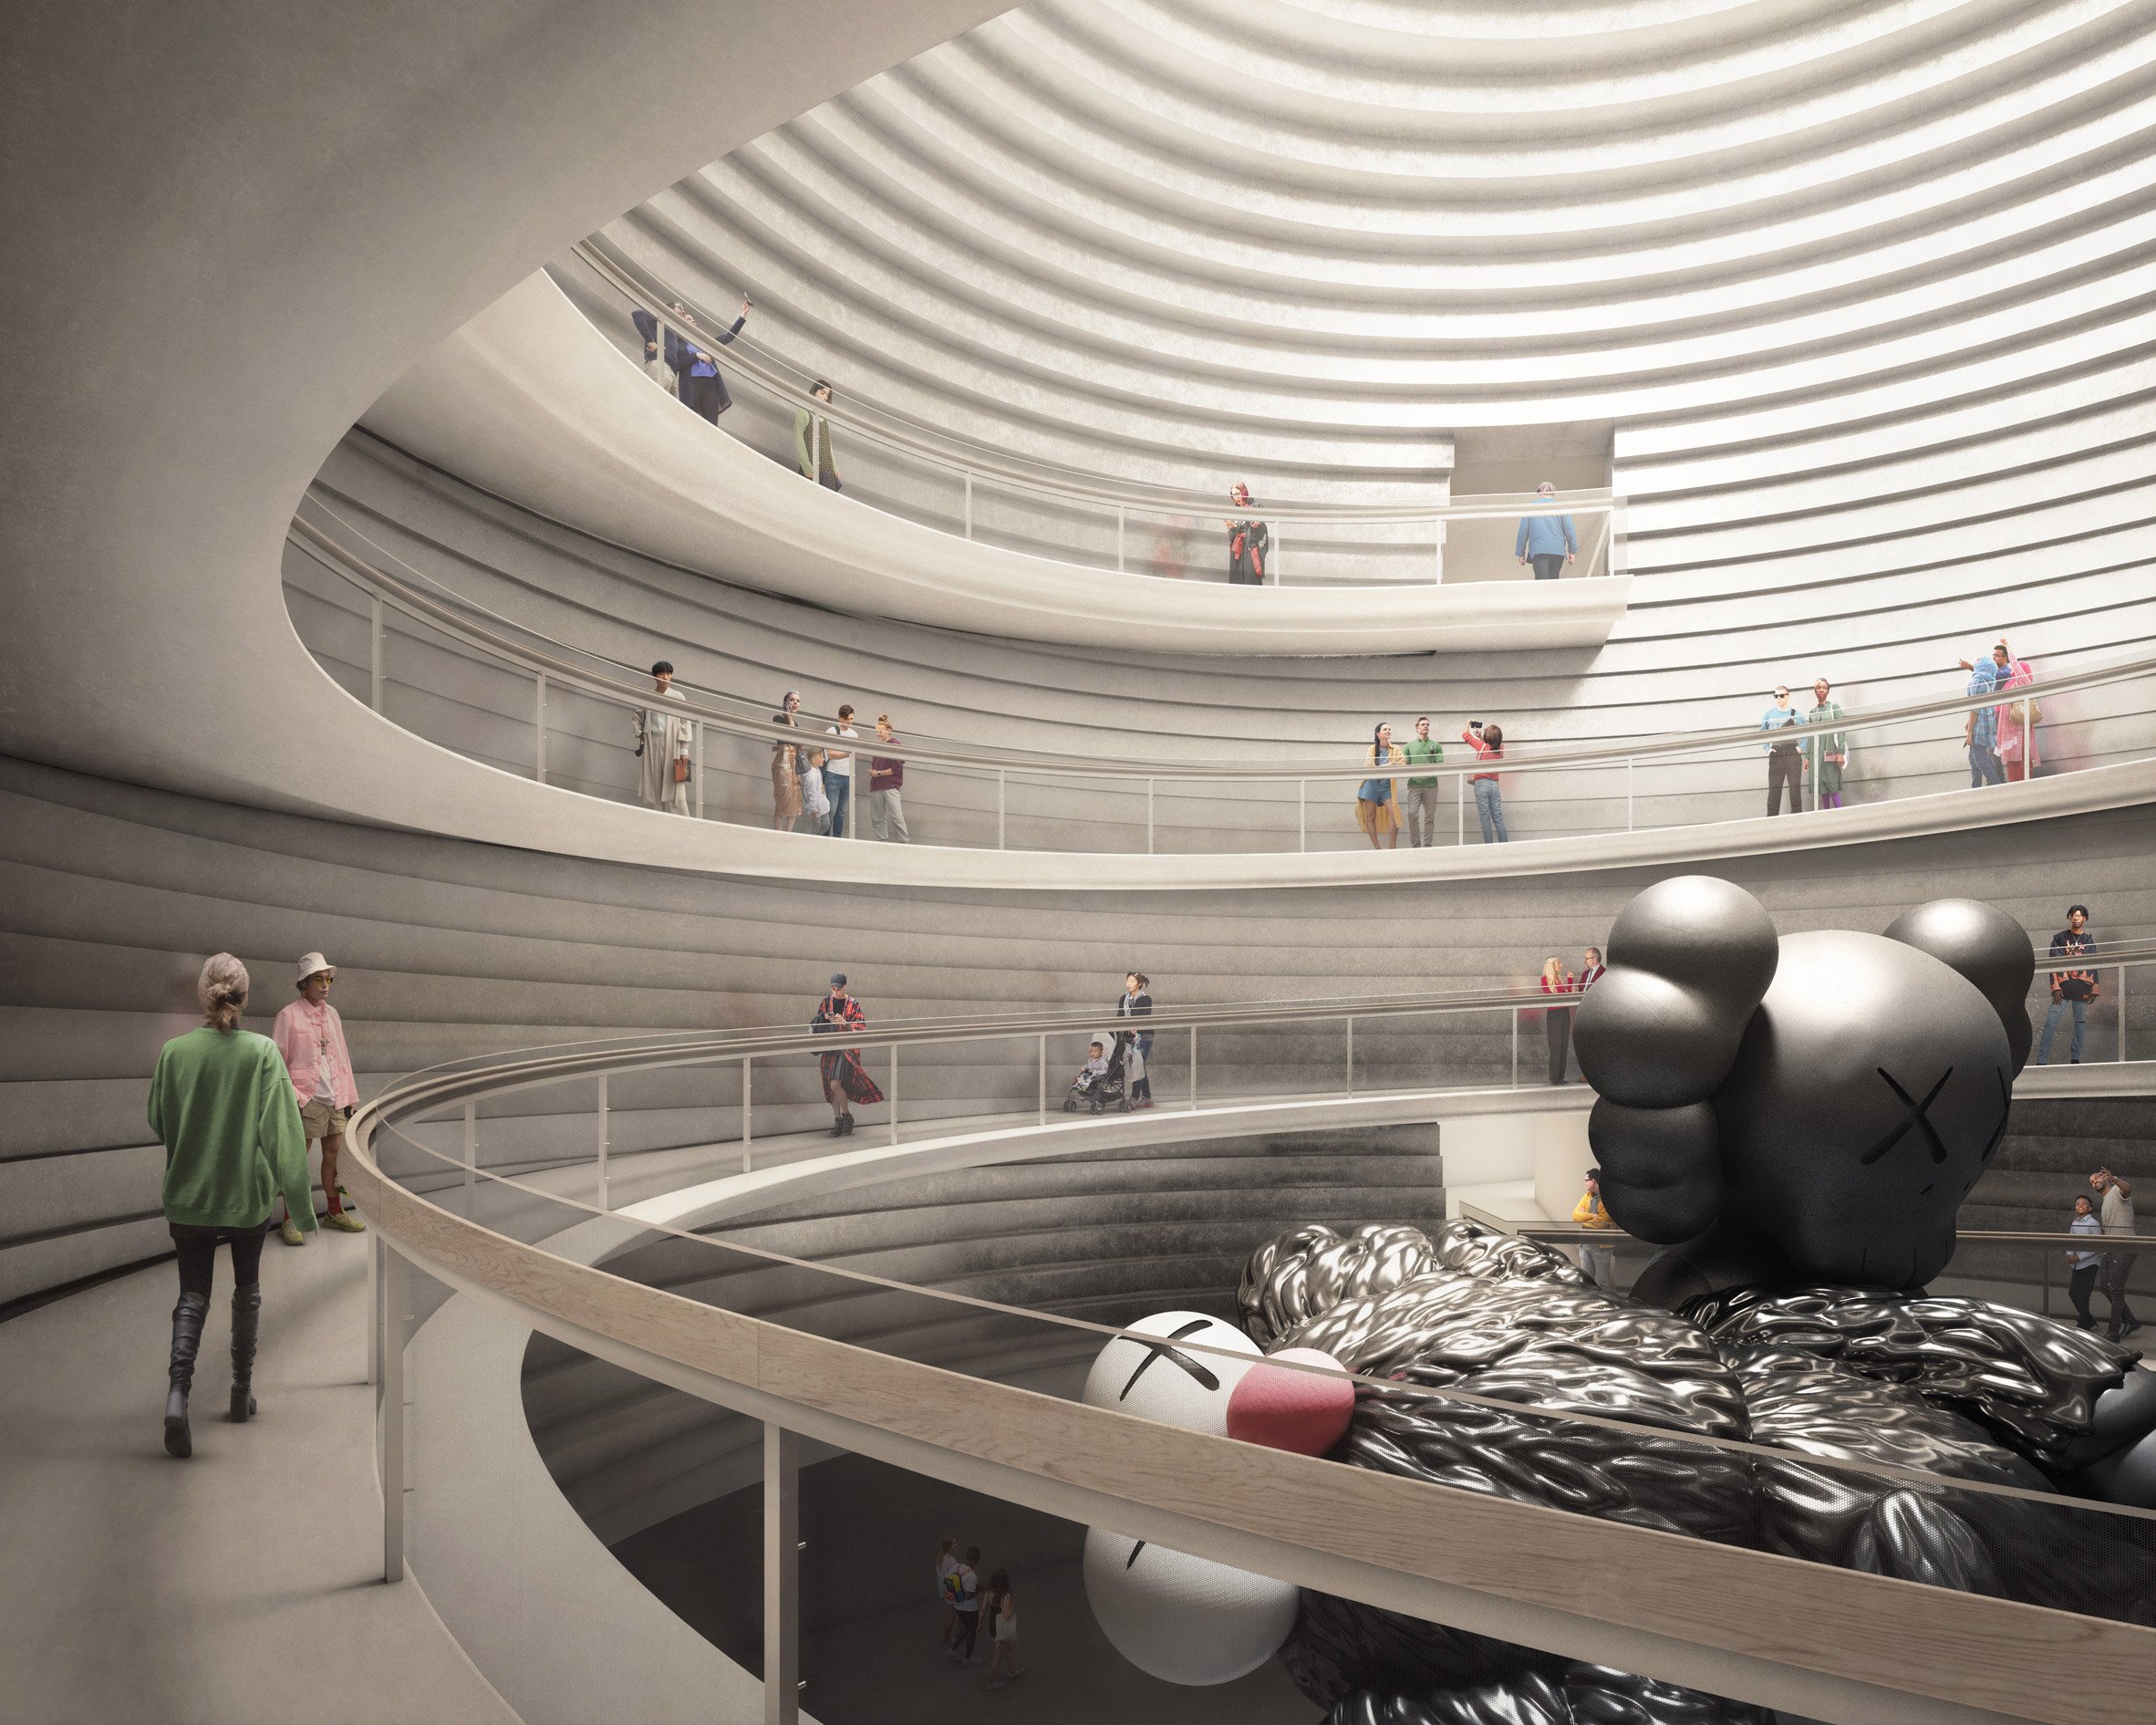 Render of the spiral walkways in the atrium of the gallery